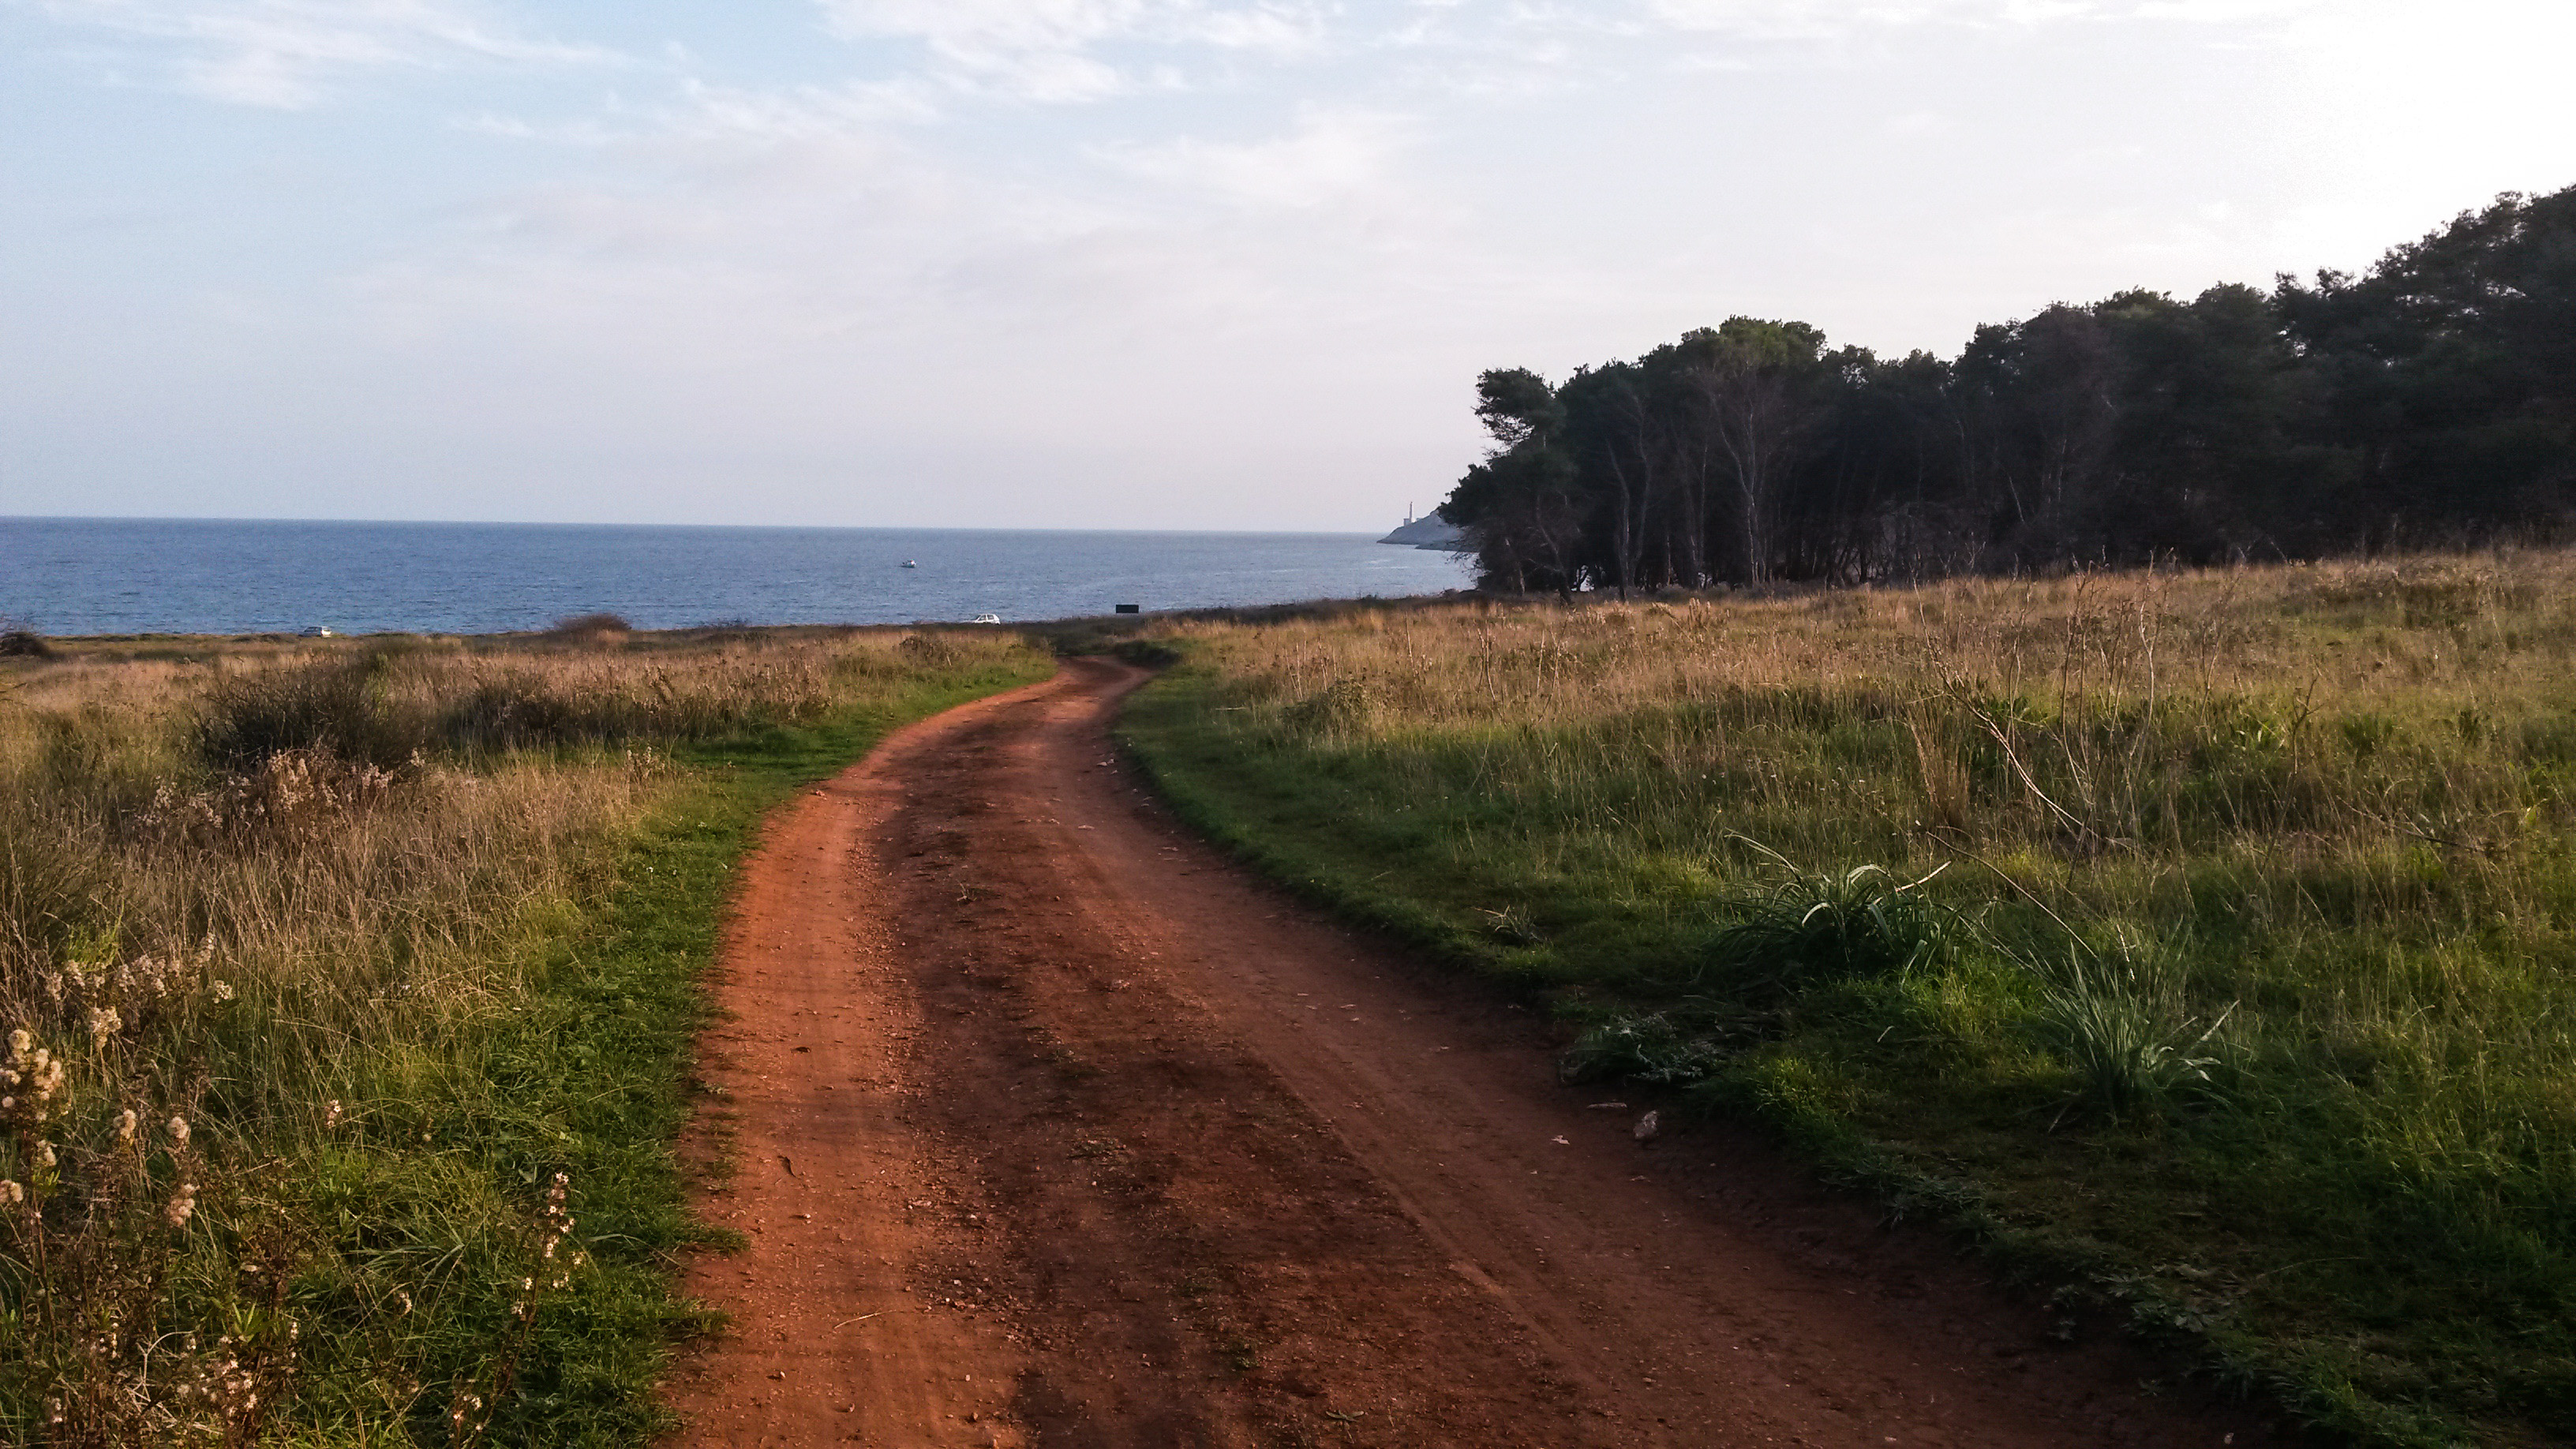 Explorer's trail, forest, sea, grass and the beautiful red bauxite rock. Along the way you can see understand the travel.